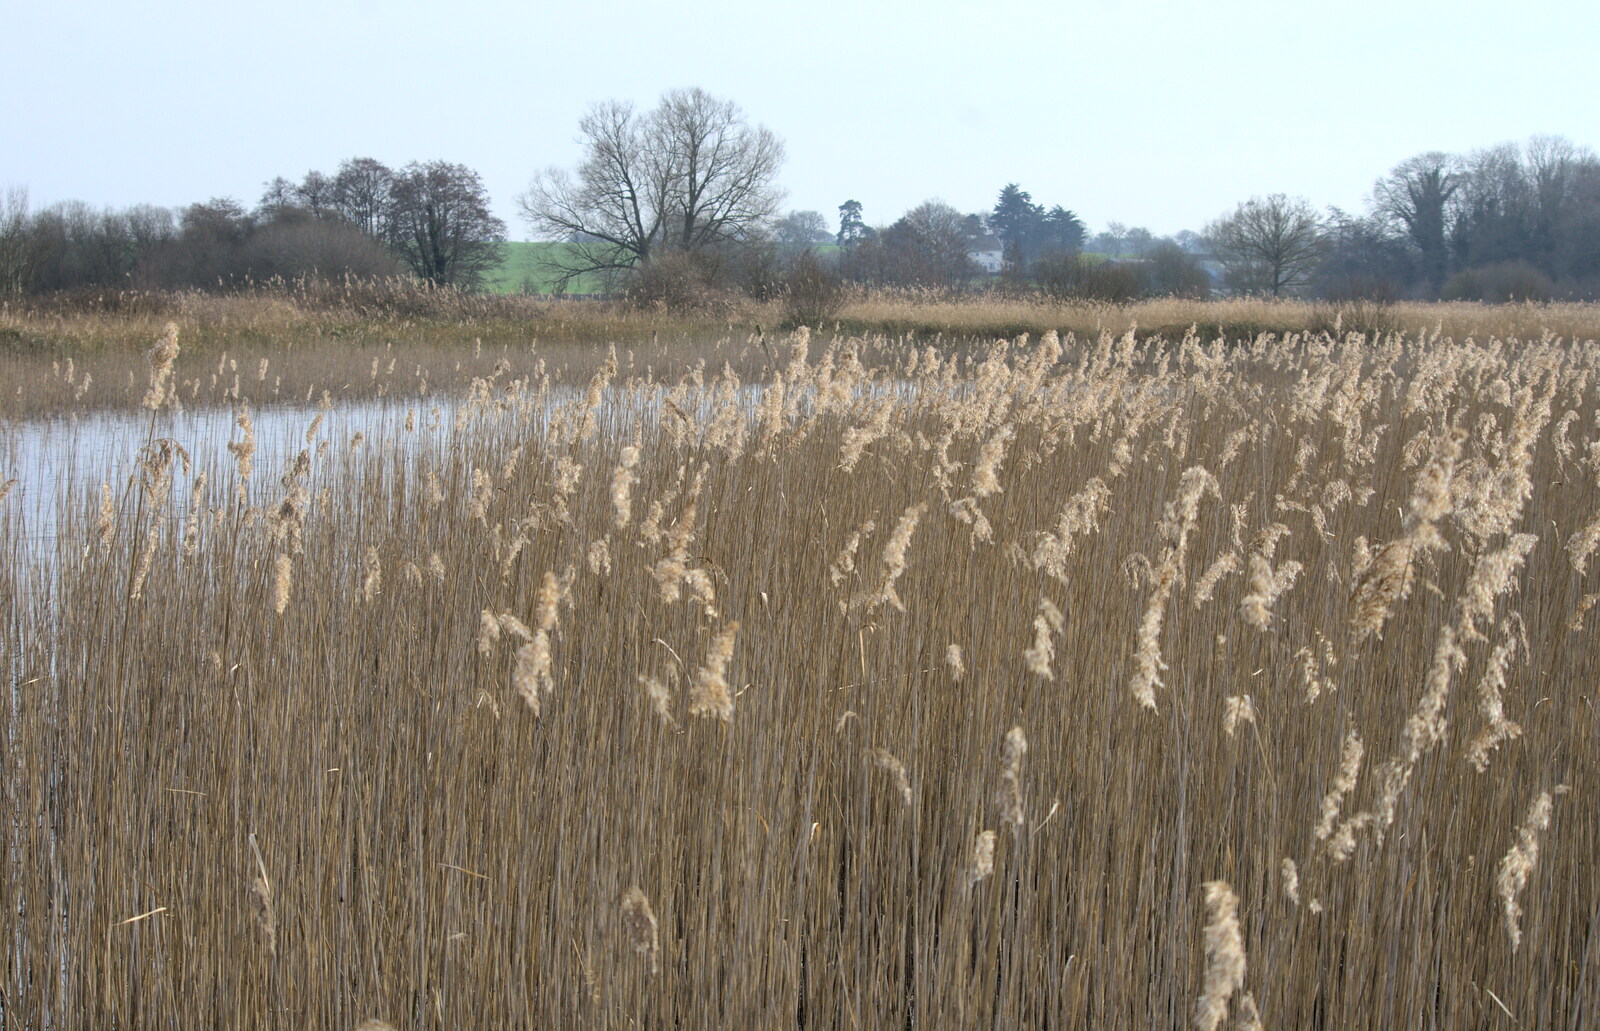 Reeds on the fen from Redgrave and Lopham Fen, Suffolk Border - 11th March 2017